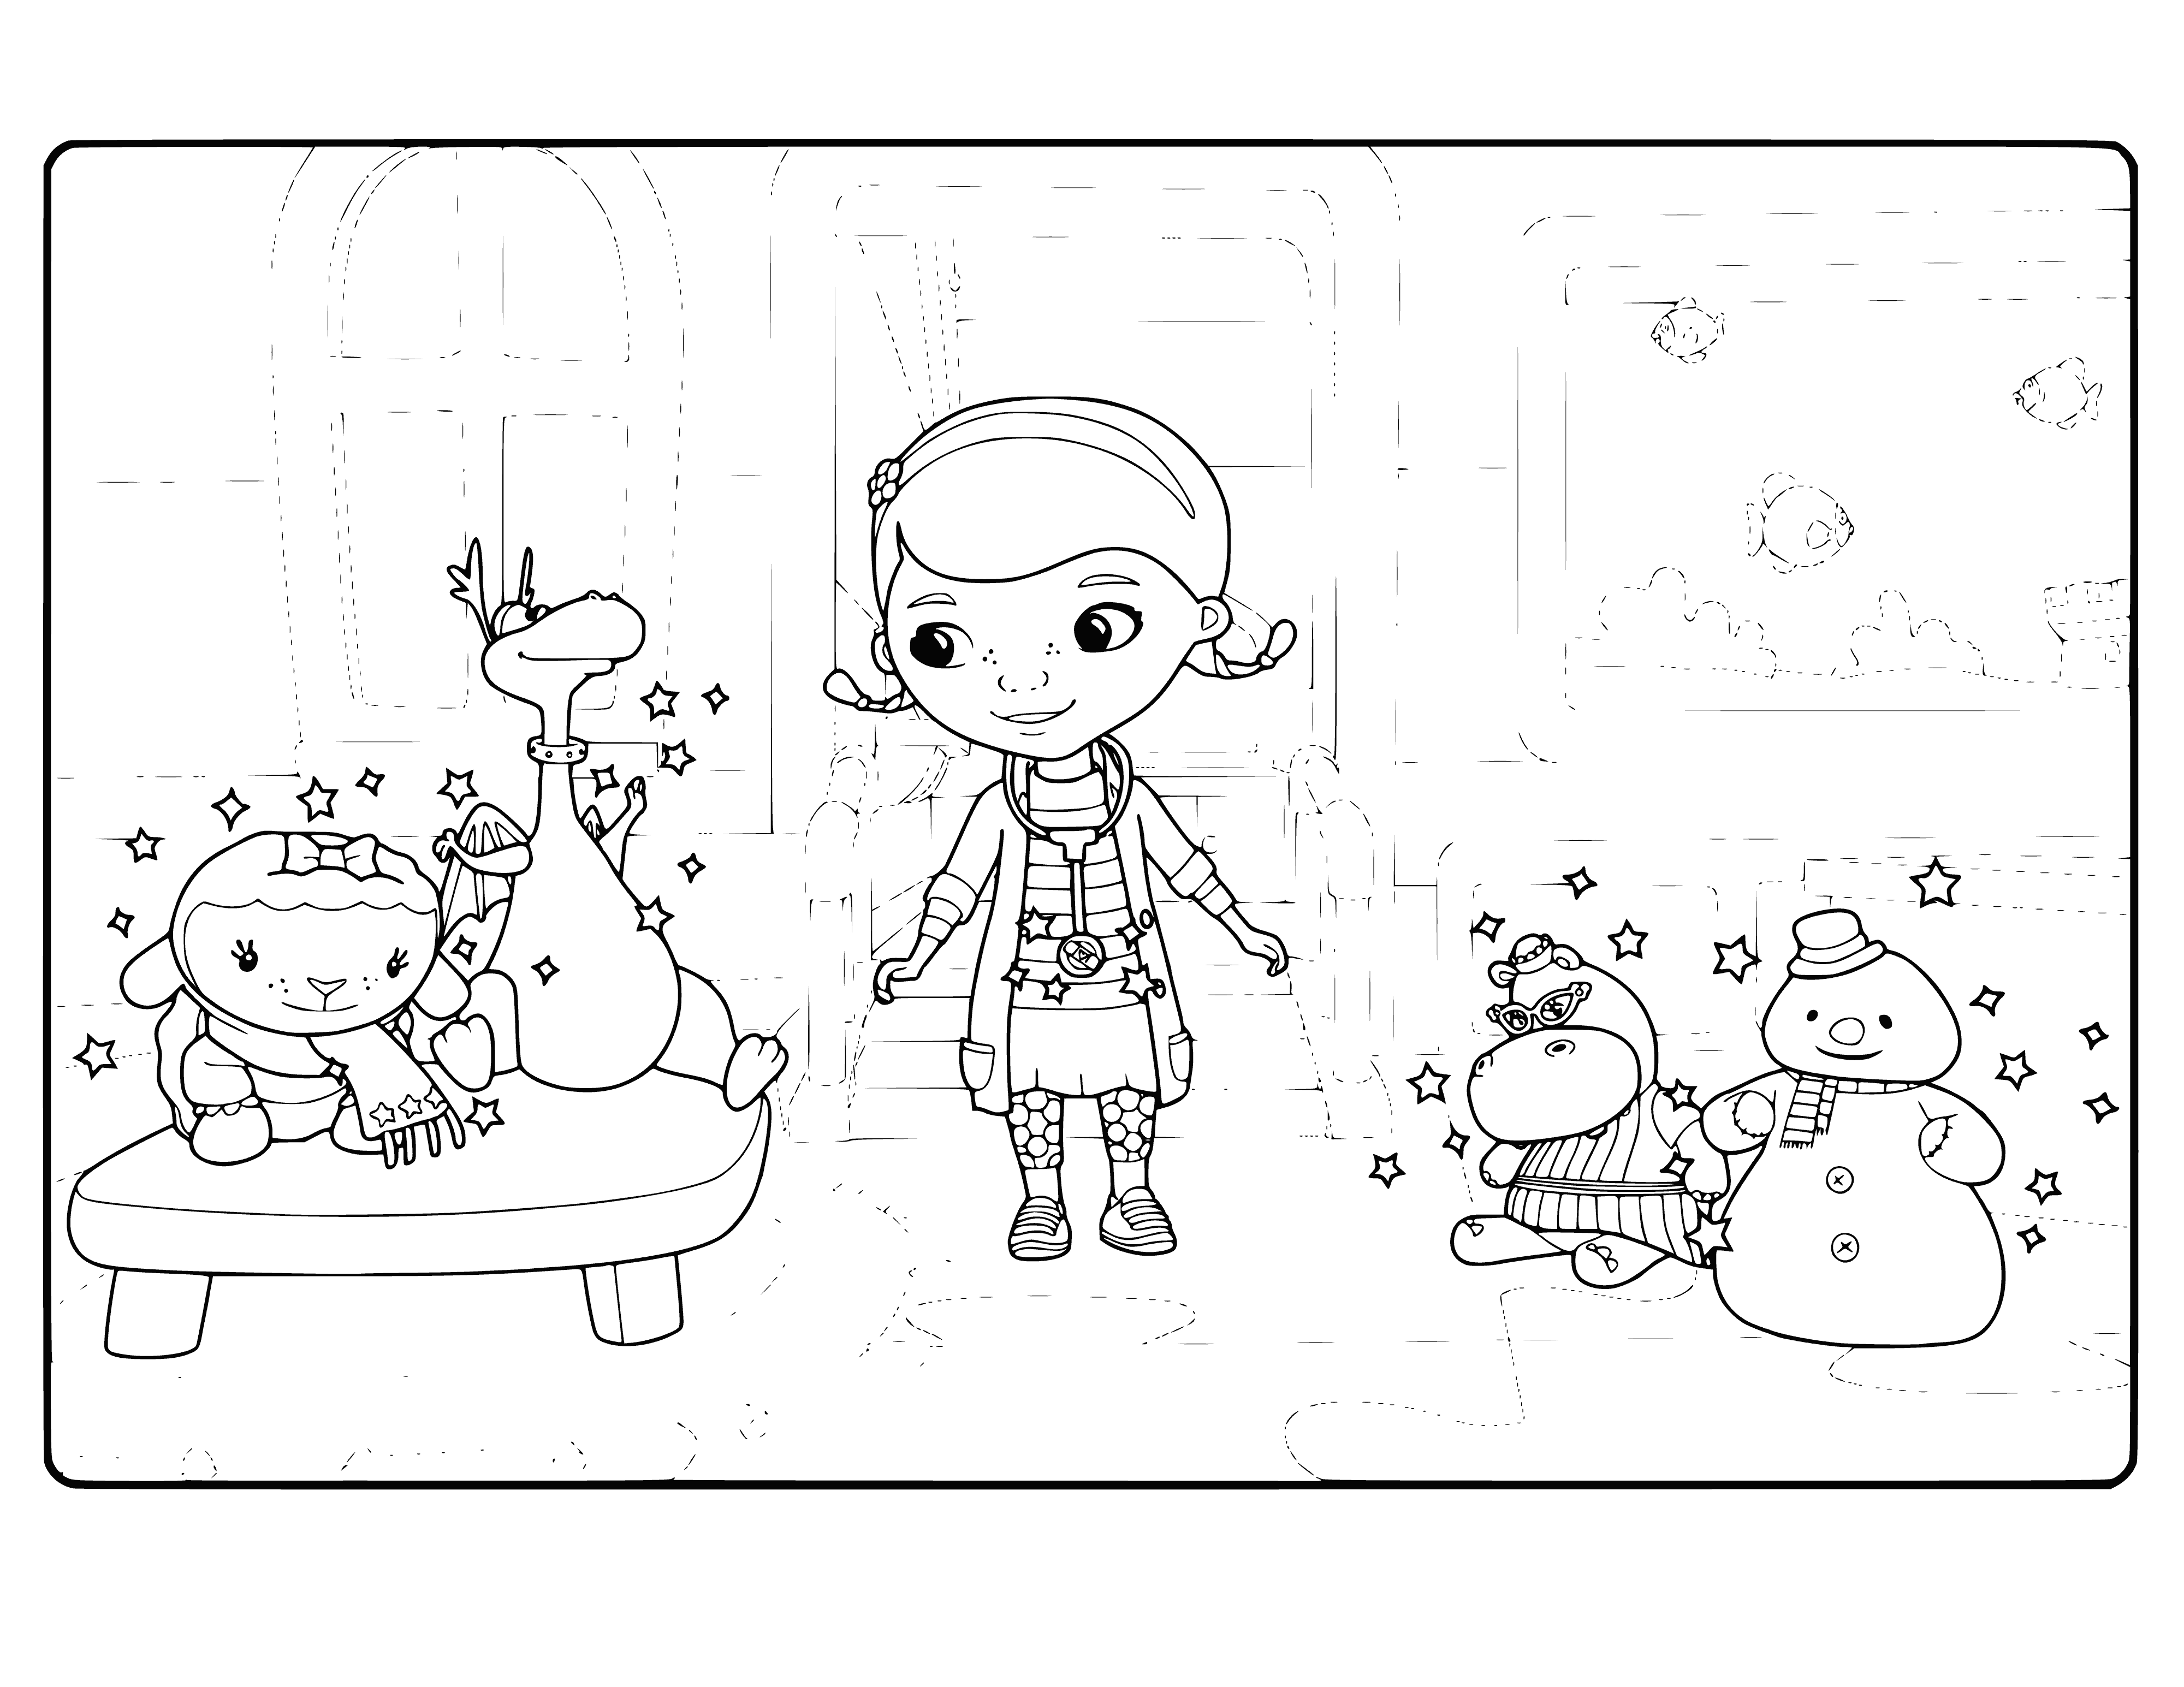 coloring page: Girl in pink doctor's coat listens to dragon's heartbeat as stuffed animals sit on checkered blanket. Unicorn looks worried.